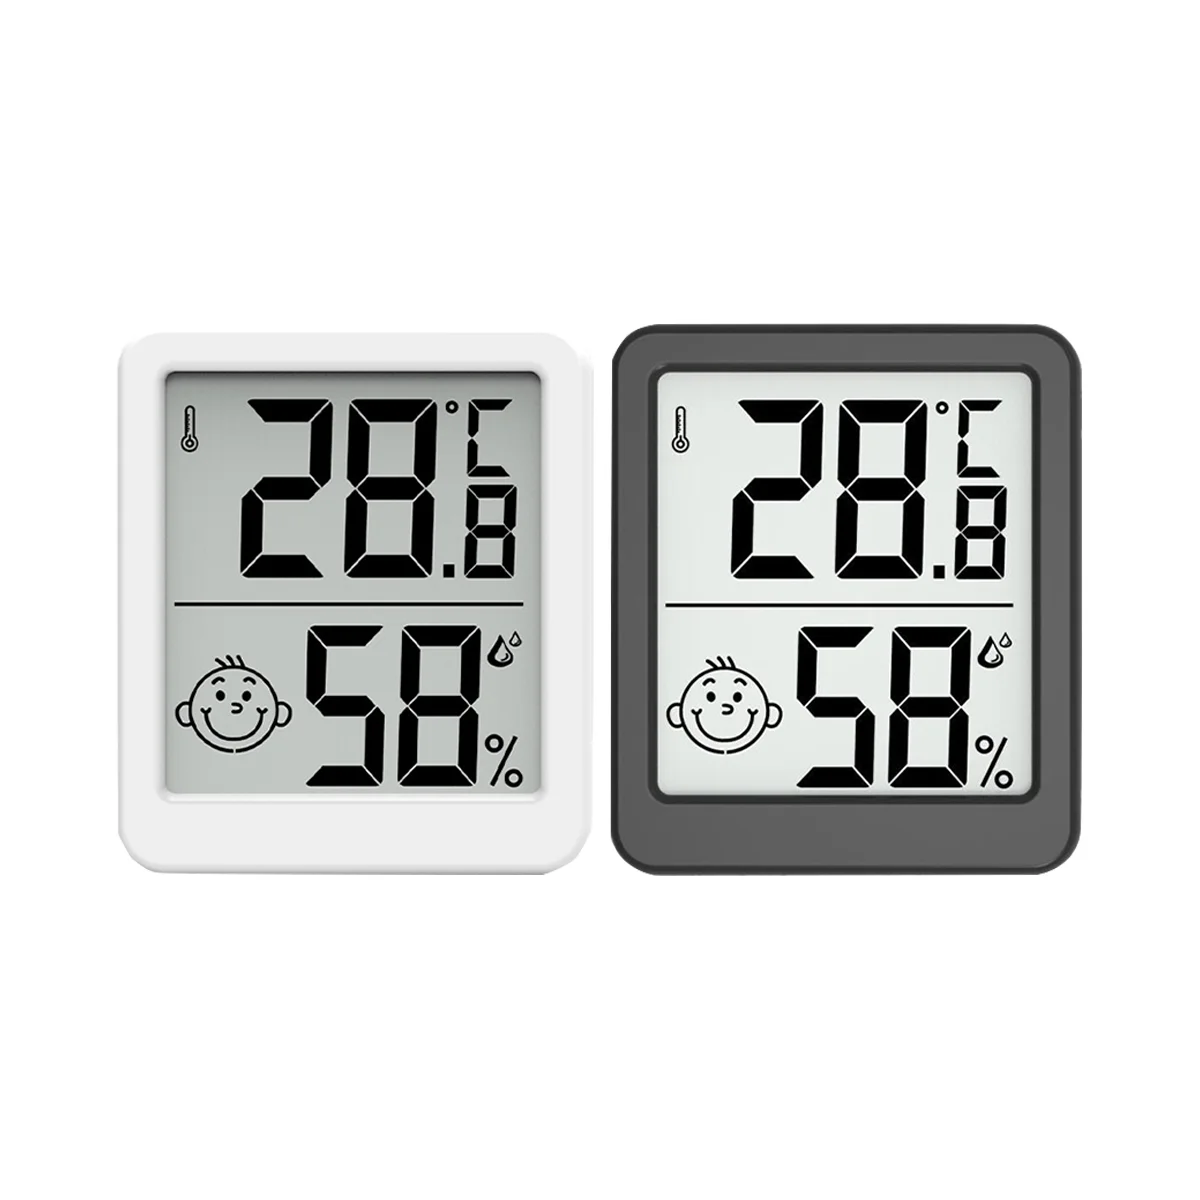 

LCD Digital Thermometer Hygrometer Indoor Room Electronic Temperature Humidity Meter Sensor Gauge Weather Station